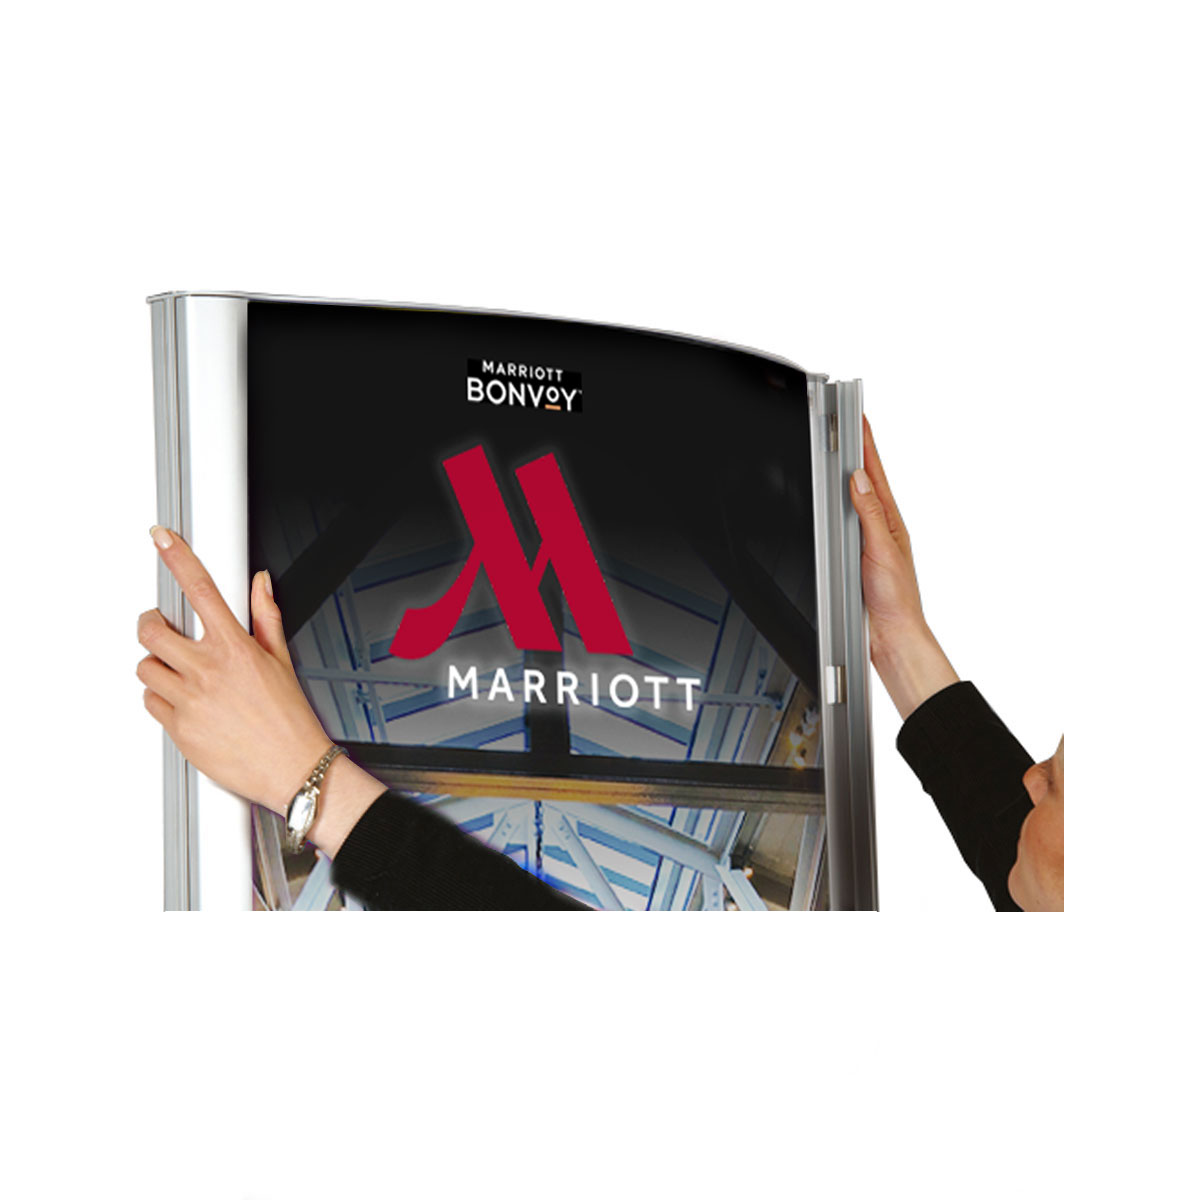 Free Standing Poster Lightbox Display Is Available in Three Sizes With Optional Printed Posters